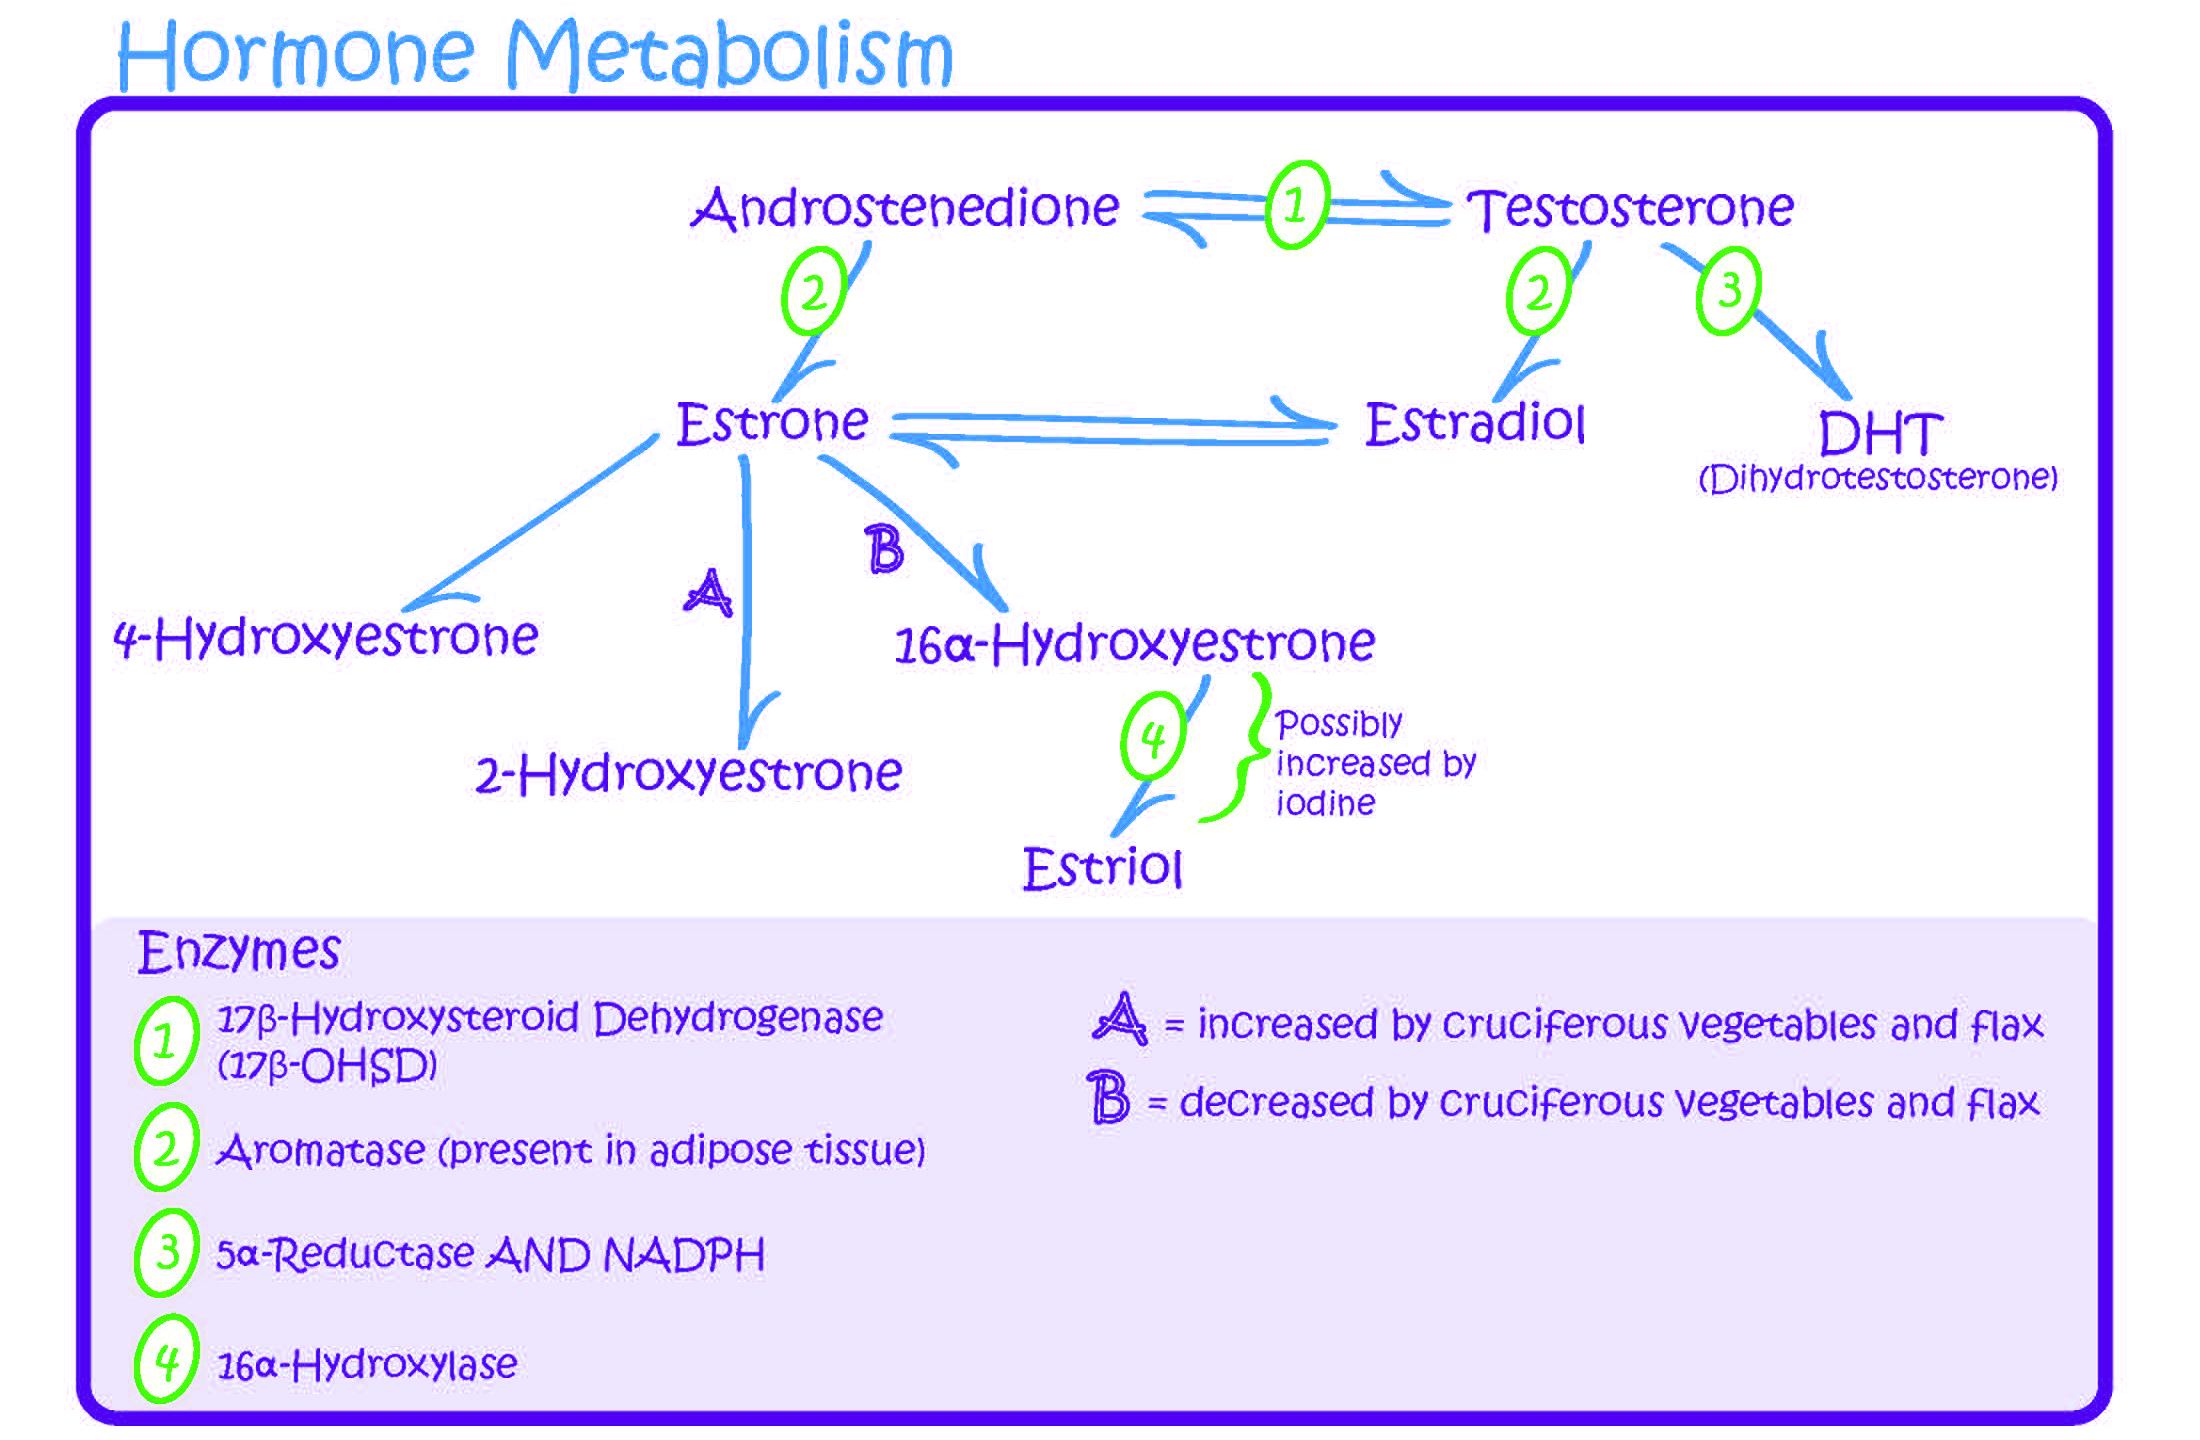 Figure 1 outlines how estrogens fit into the steroid metabolism pathway.